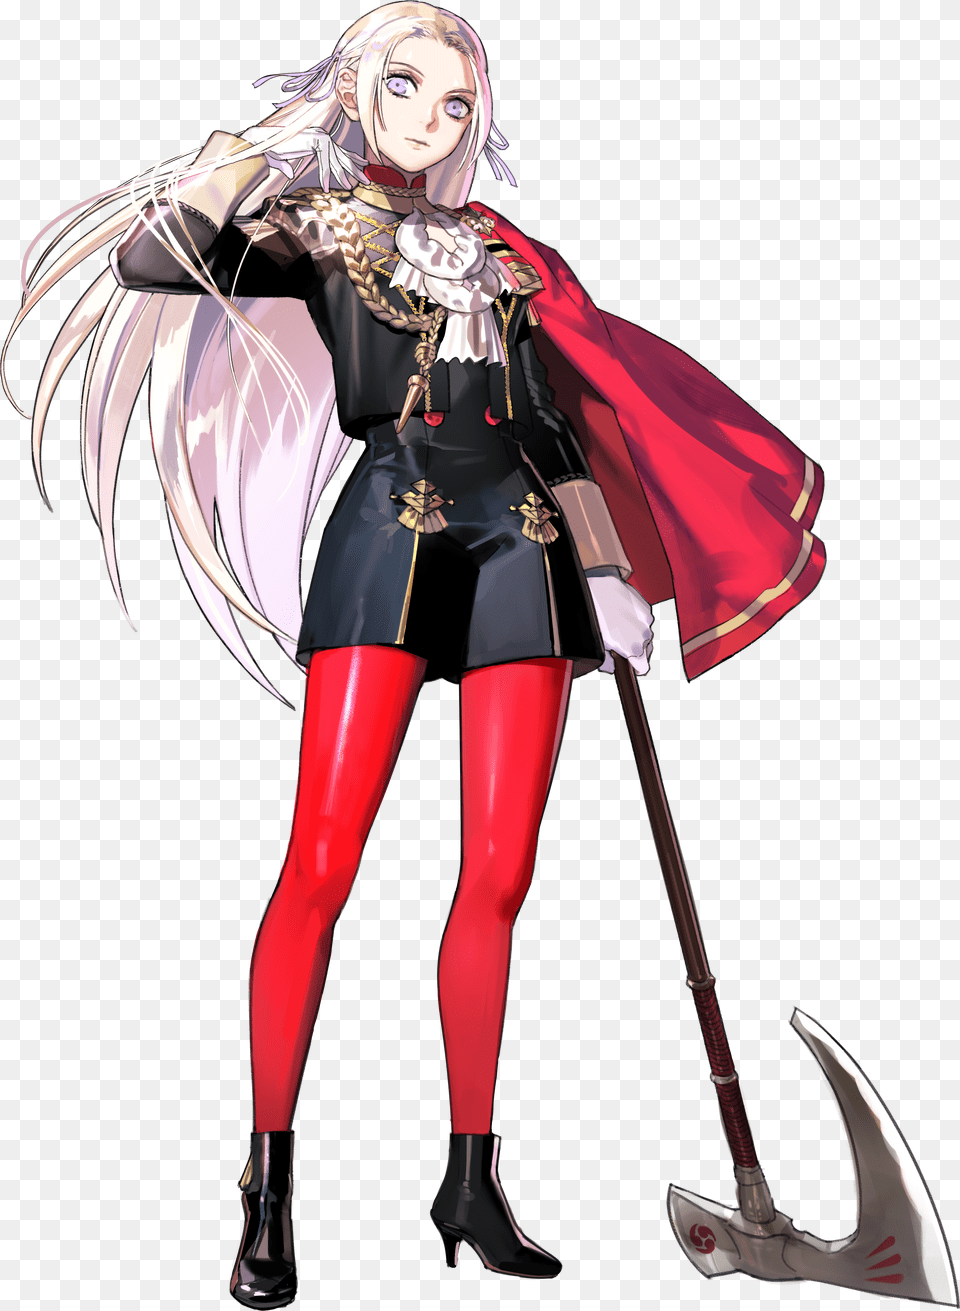 Official Artwork Of Edelgard From Fire Emblem Fire Emblem Fire Emblem Three Houses Edelgard Png Image